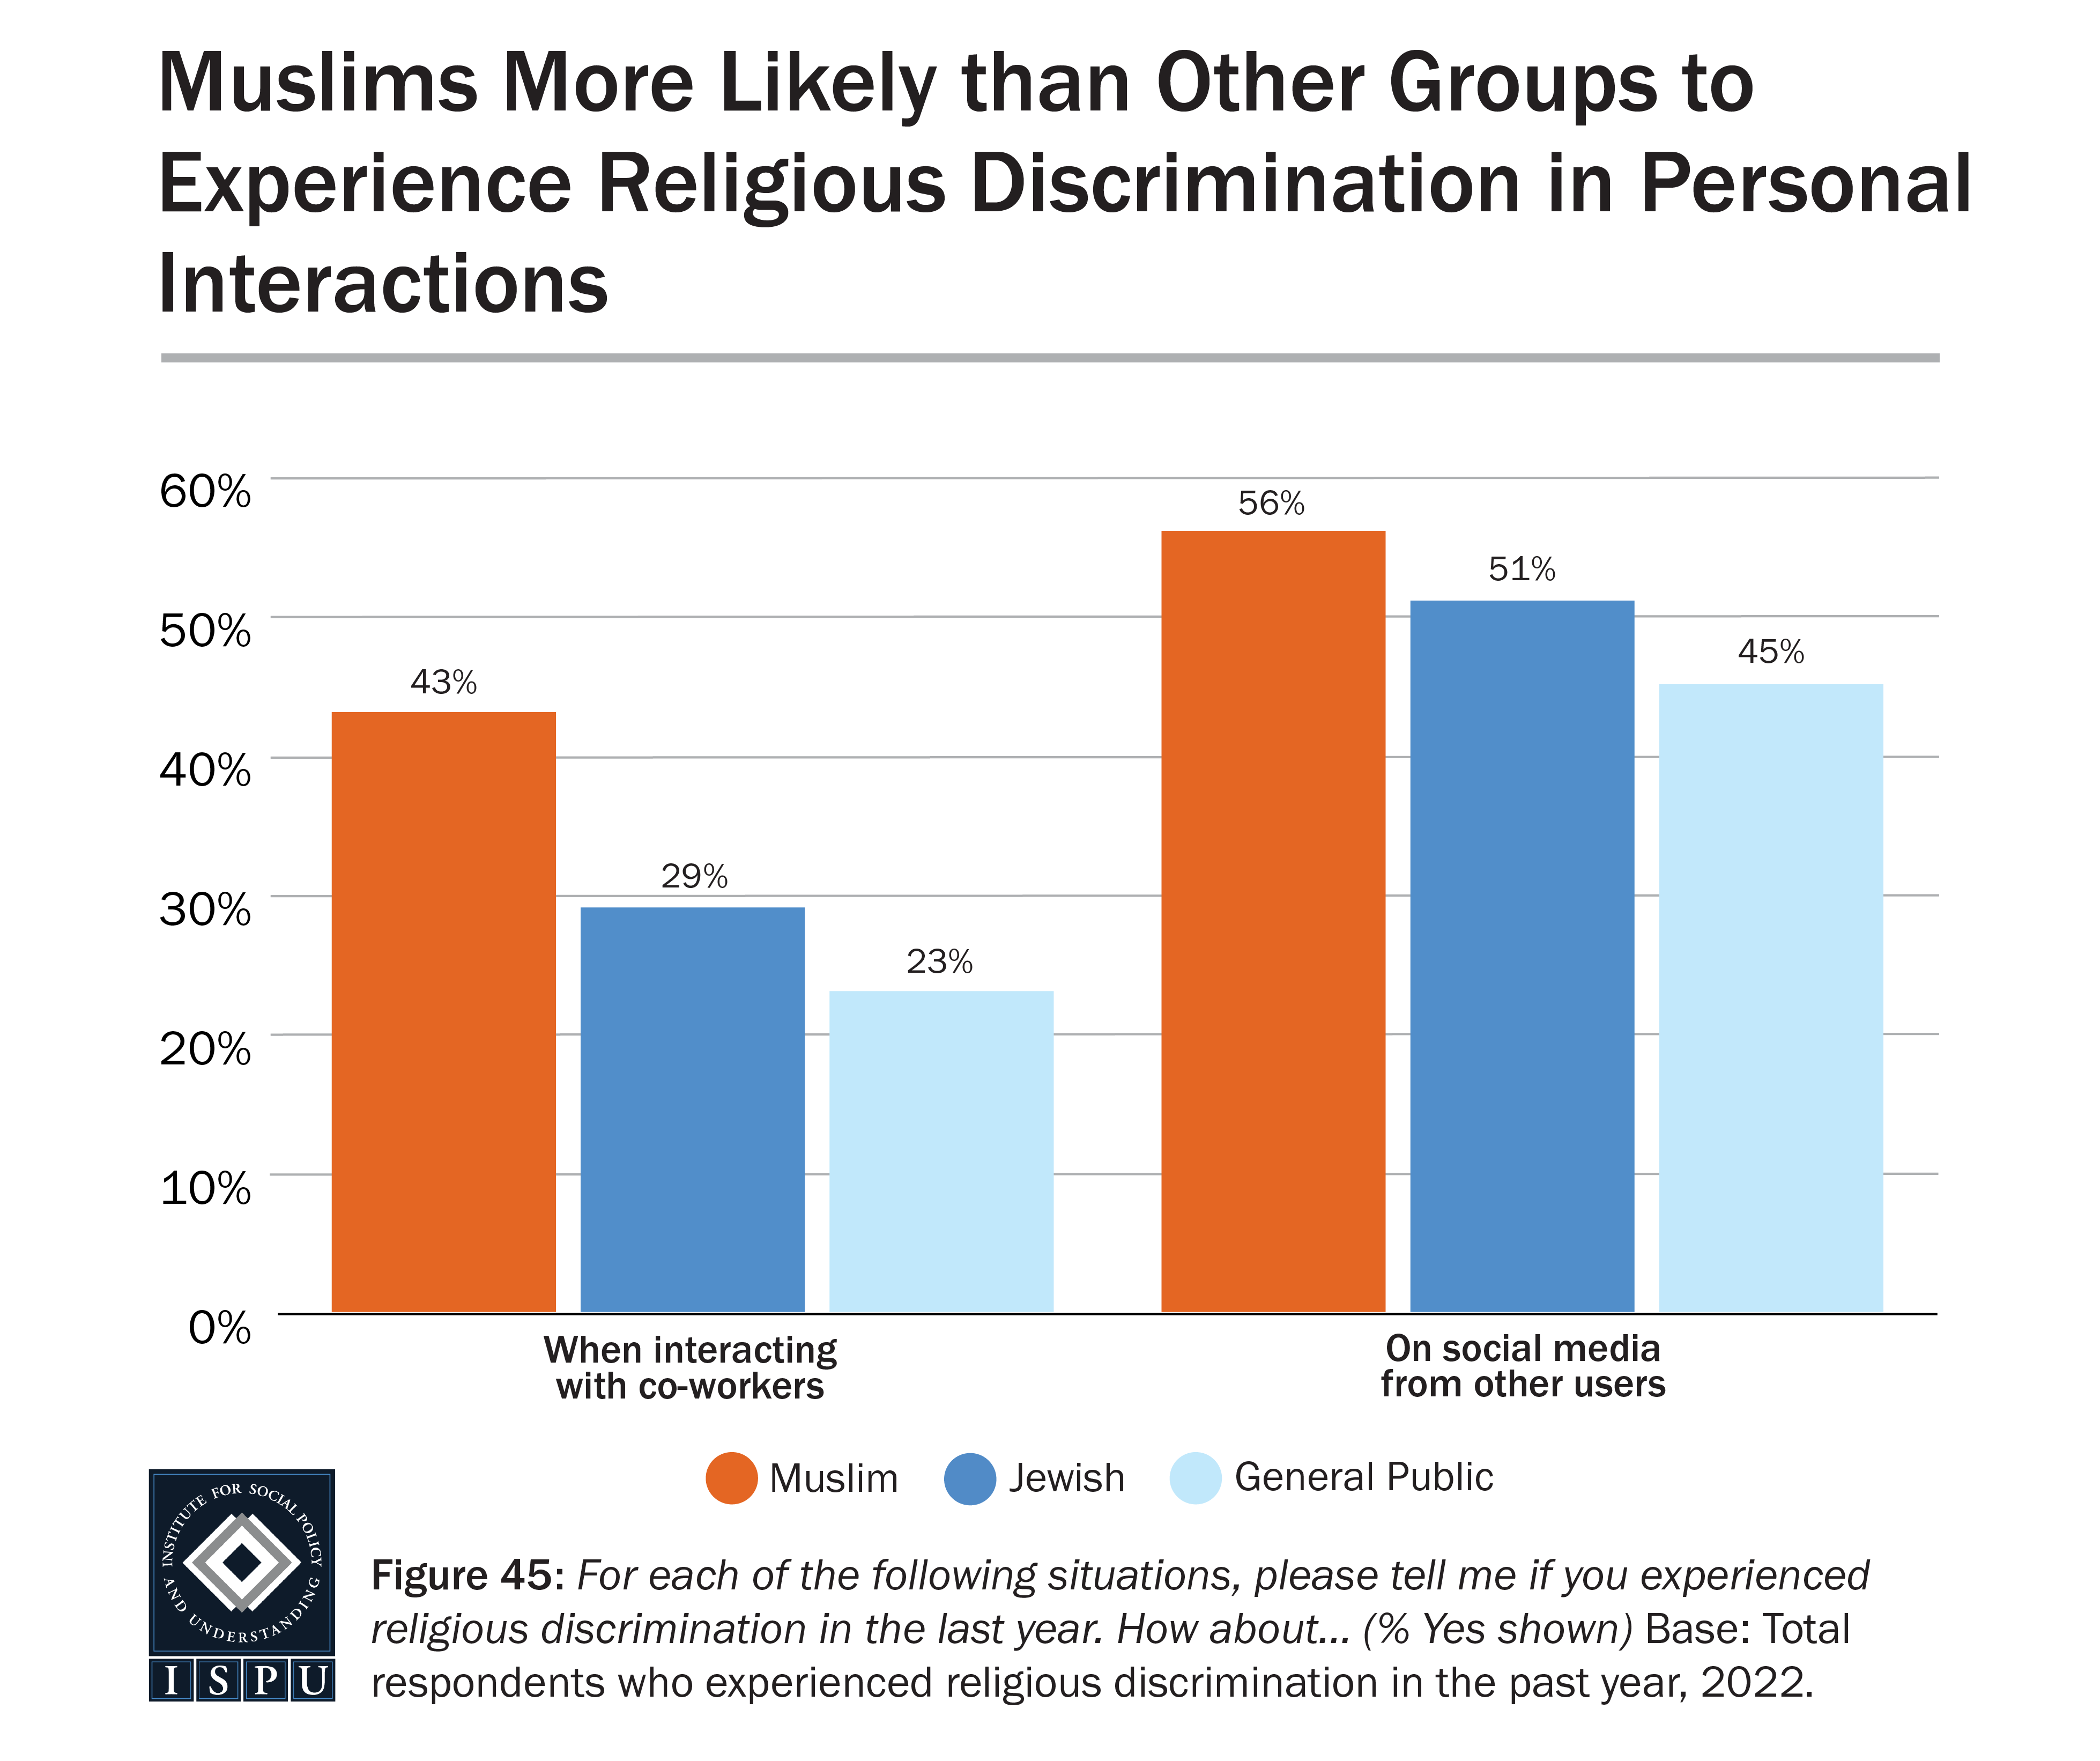 A bar graph showing various personal settings where religious discrimination occurred among Muslims, Jews, and the general public who report facing religious discrimination in the past year.